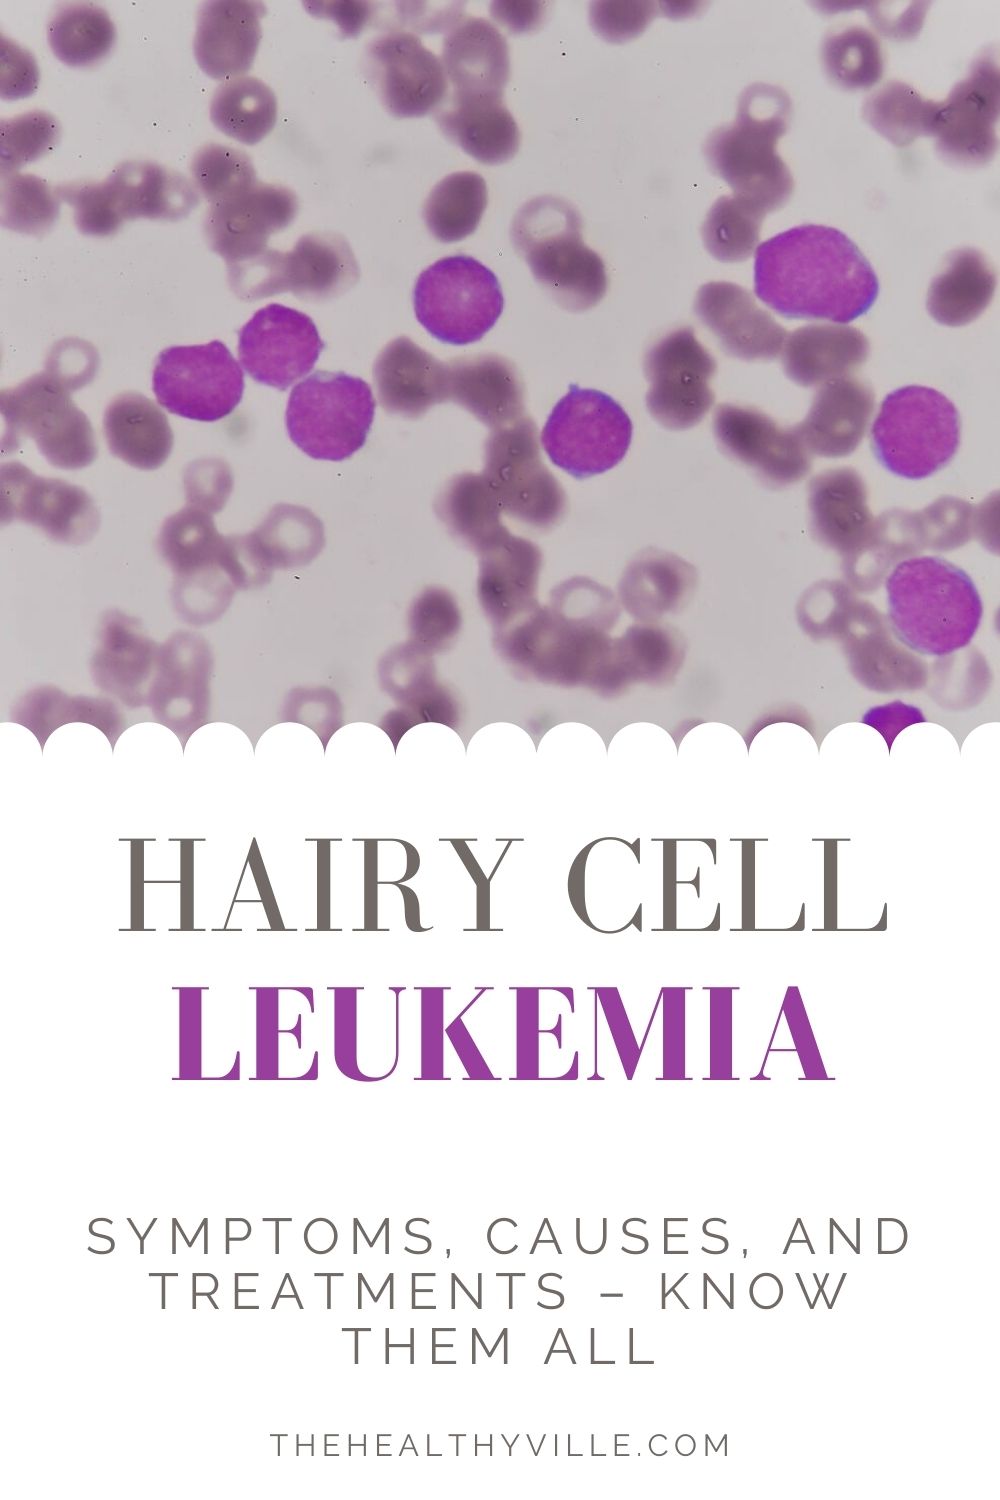 Hairy Cell Leukemia Symptoms Causes And Treatments Know Them All